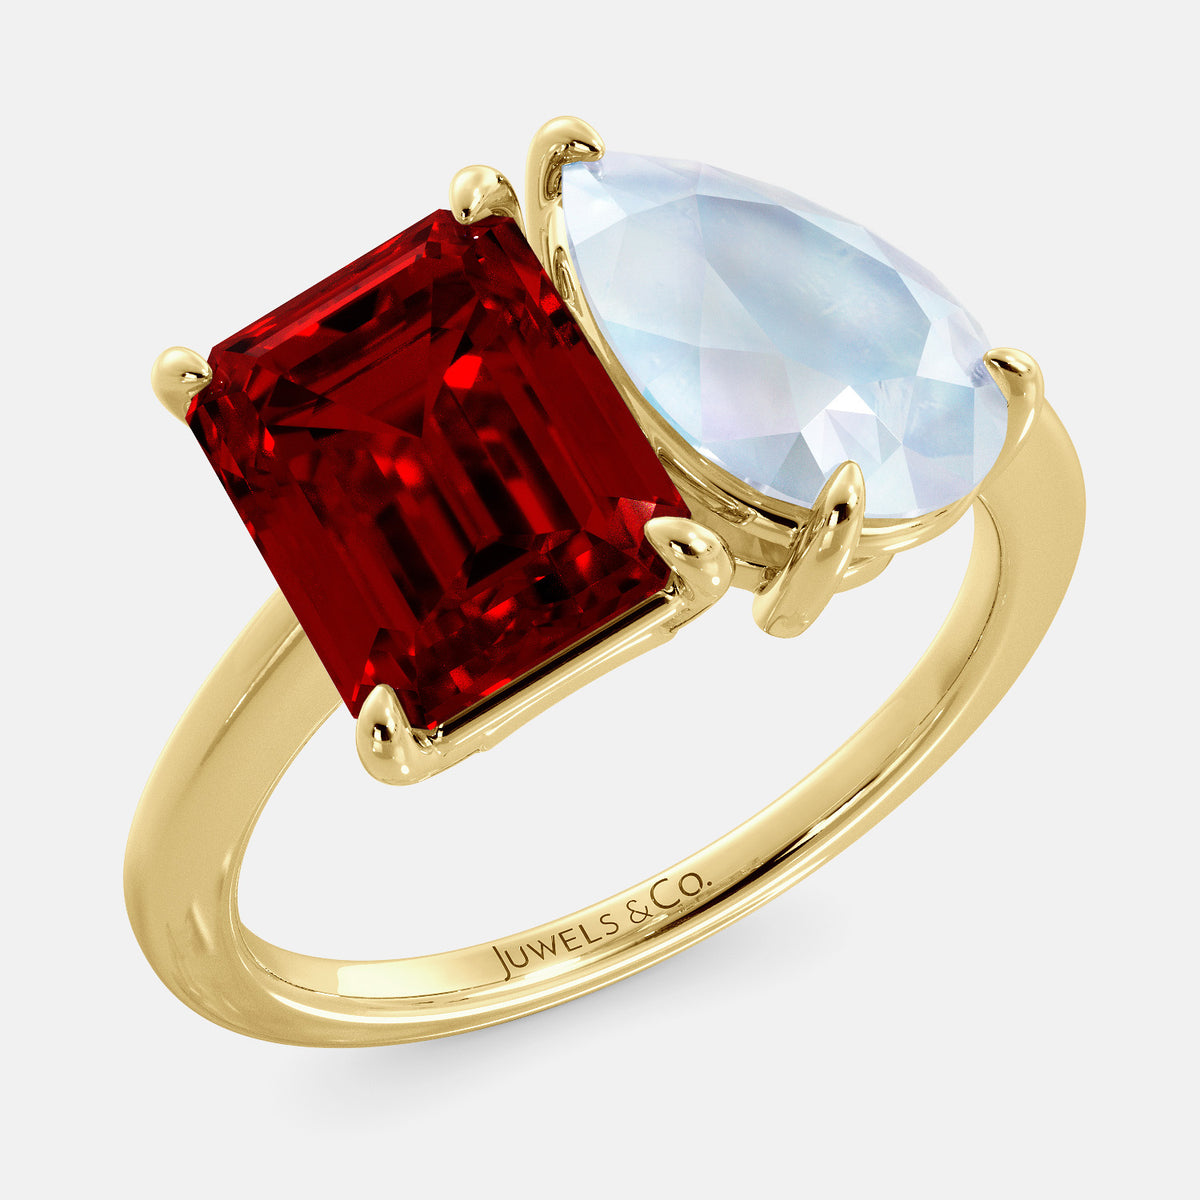 What Are the Primary Distinctions Between Ruby and Garnet? | Rashi Ratan  Bhagya